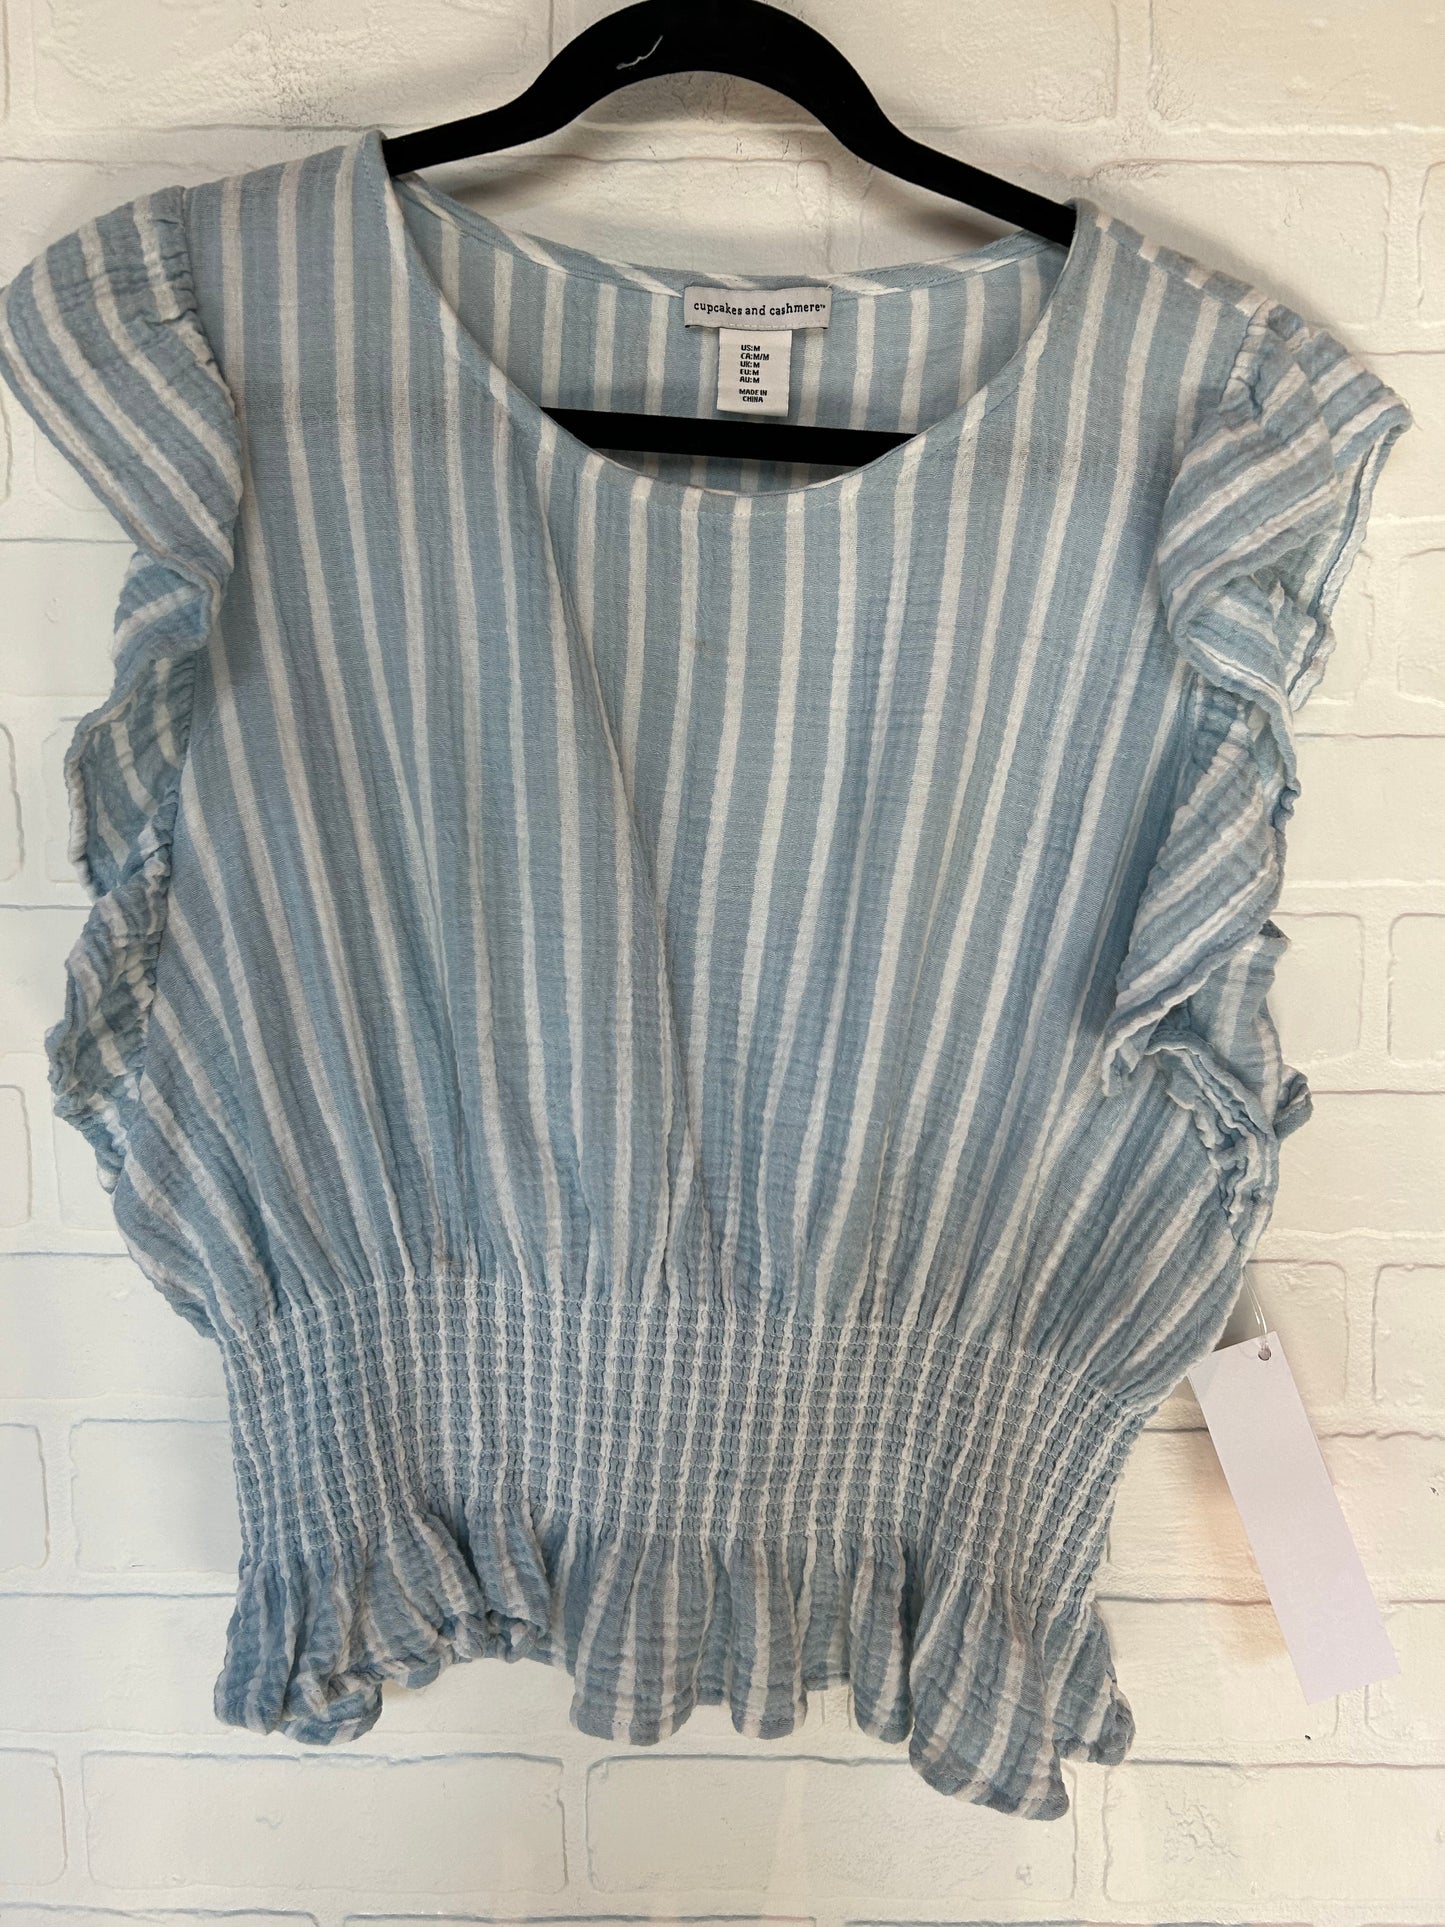 Blue & White Top Short Sleeve Cupcakes And Cashmere, Size M